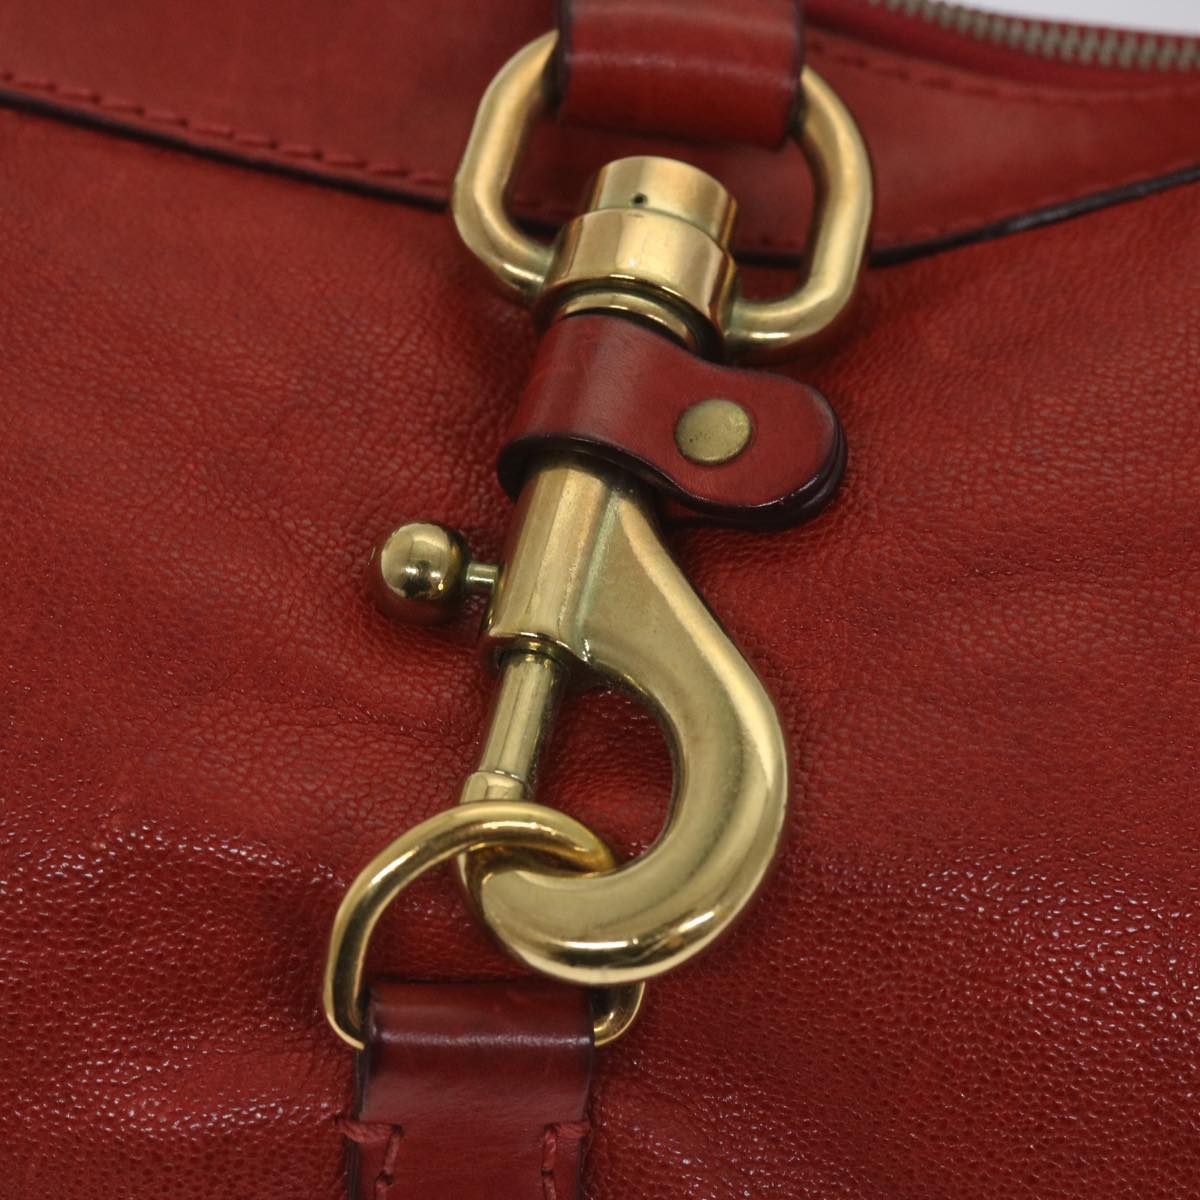 Chloe Shoulder Bag Leather Red 03 08 51 5811 Auth yk9240